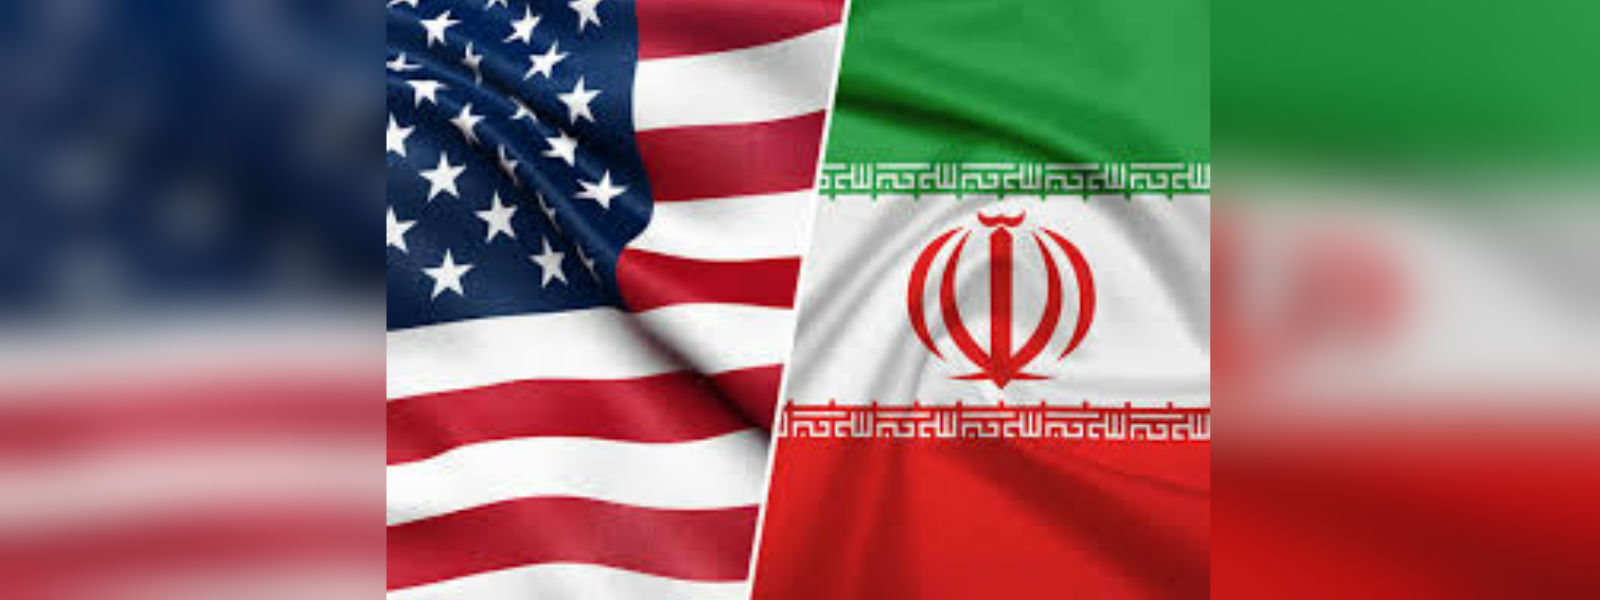 Iran launch cyber attack on a number of American state websites